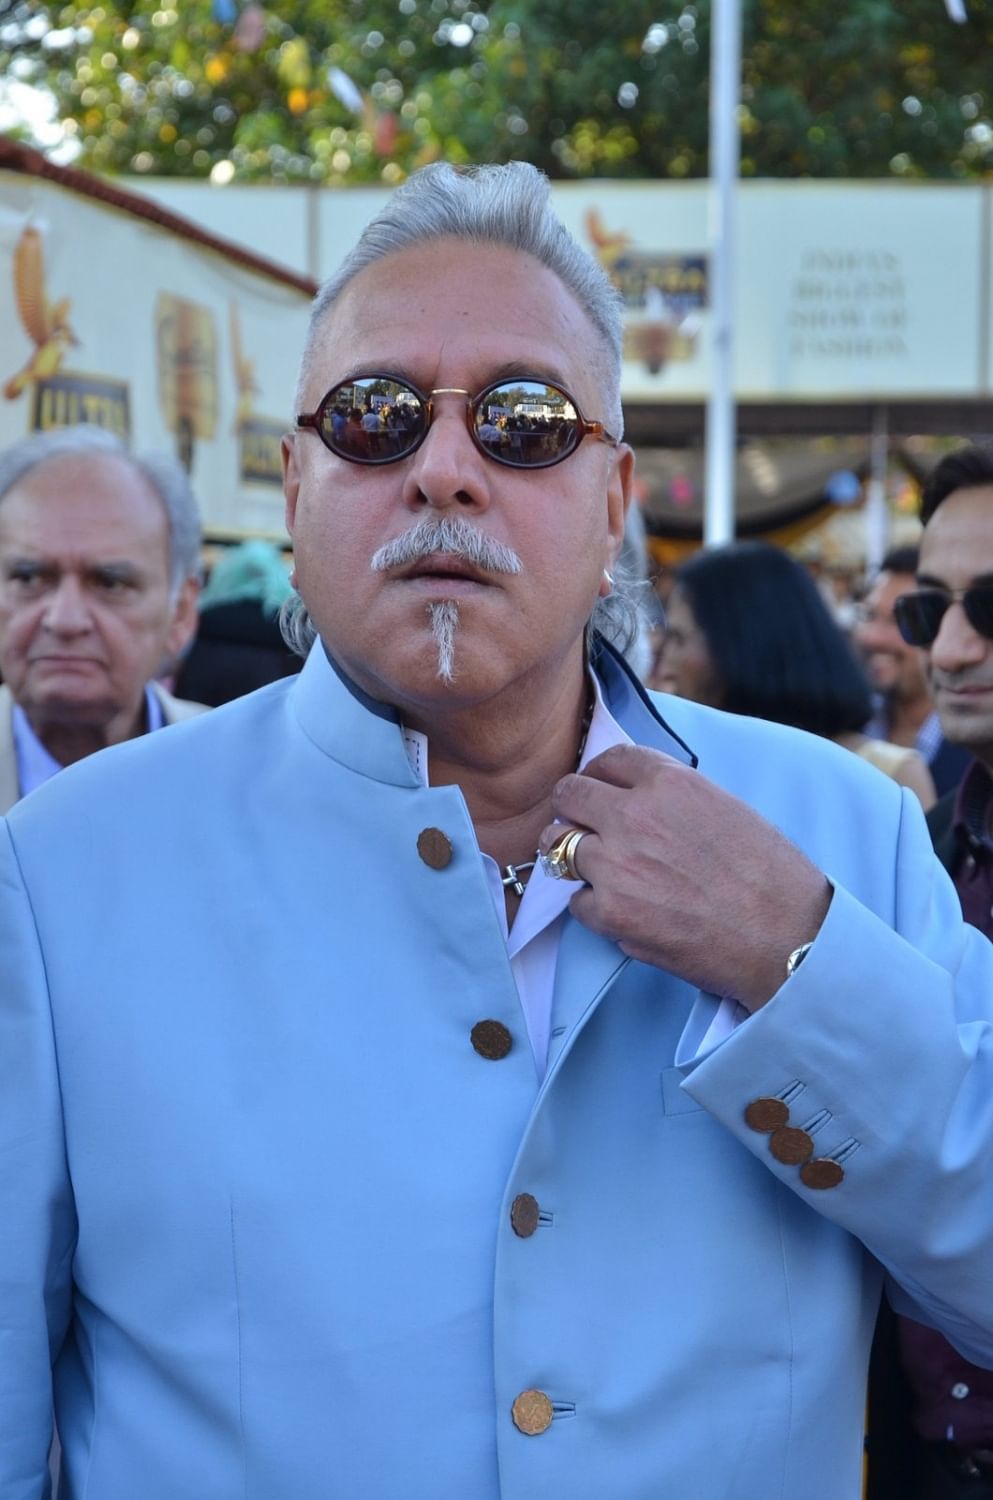 Vijay Mallya received a pay package for “promoting” Mendocino Brewing’s beer.